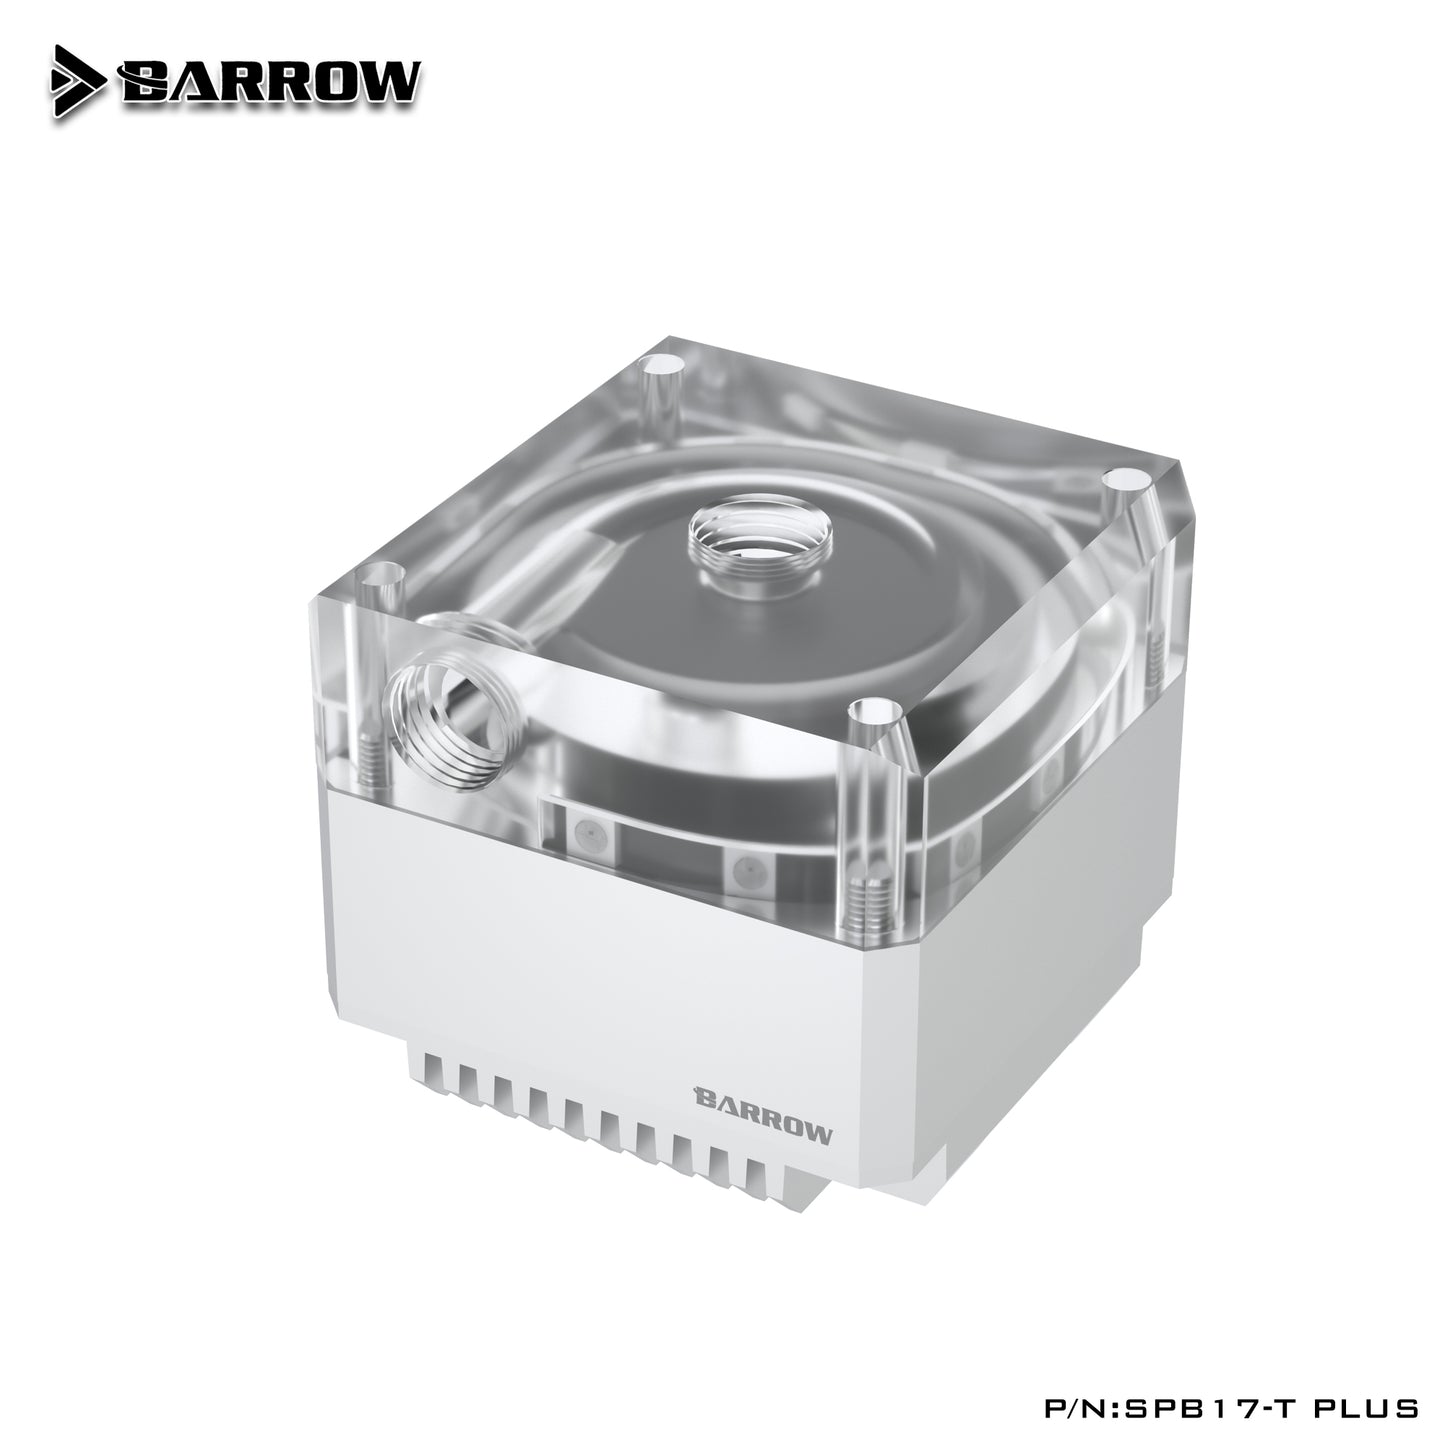 Barrow PLUS Version 17W PWM Pump, With Aluminum Radiator Cover, Special For Barrow Distro Plate SPB17-T PLUS